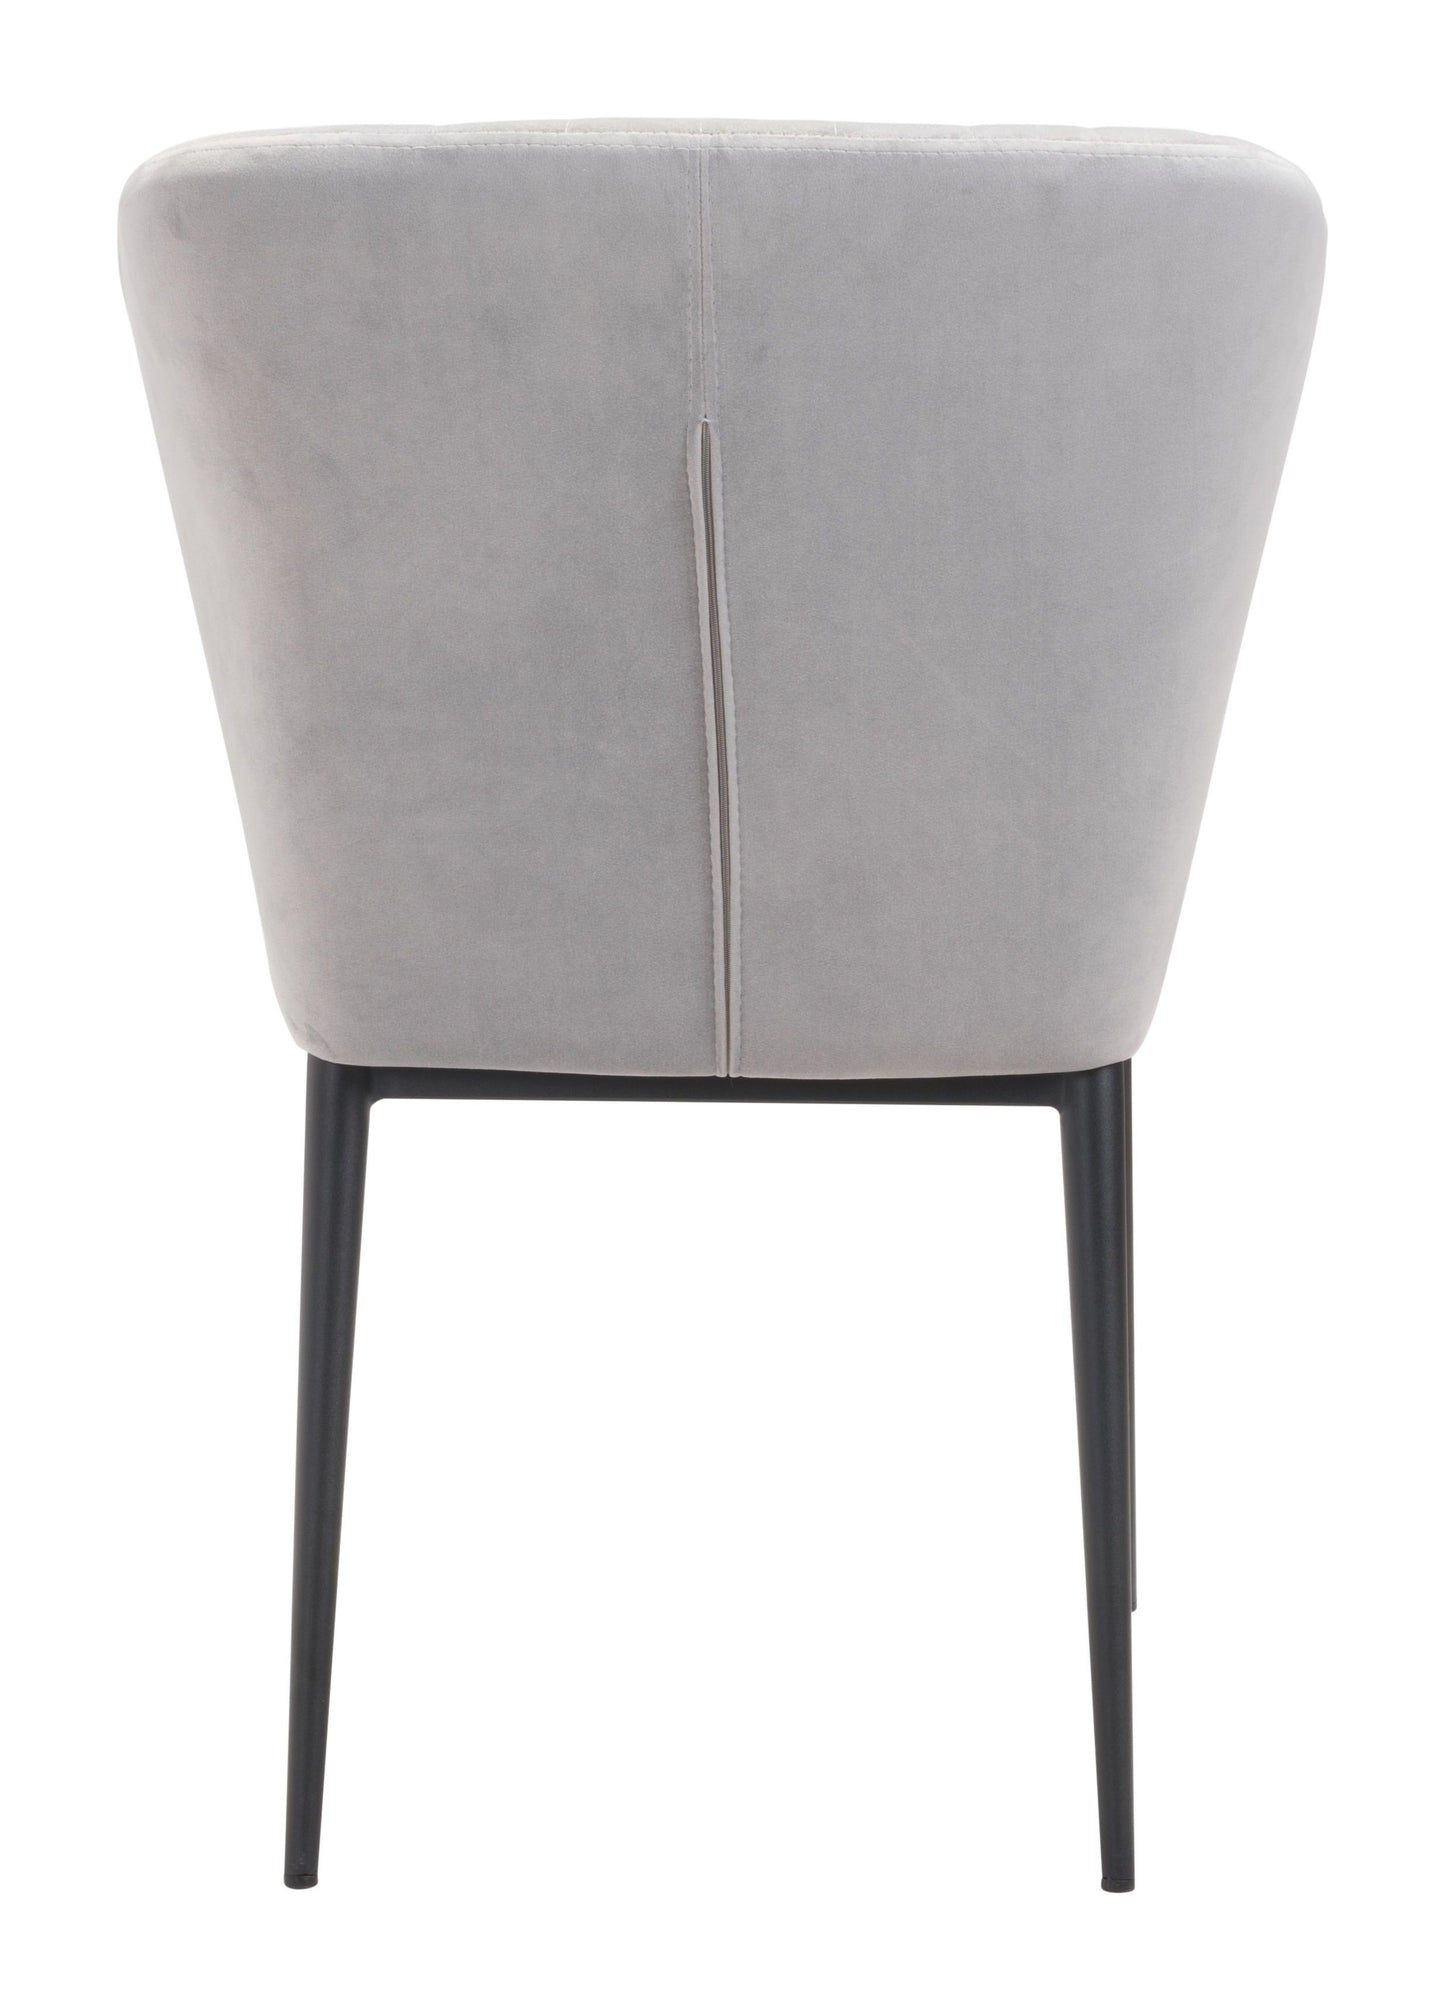 Tolivere Dining Chair Gray